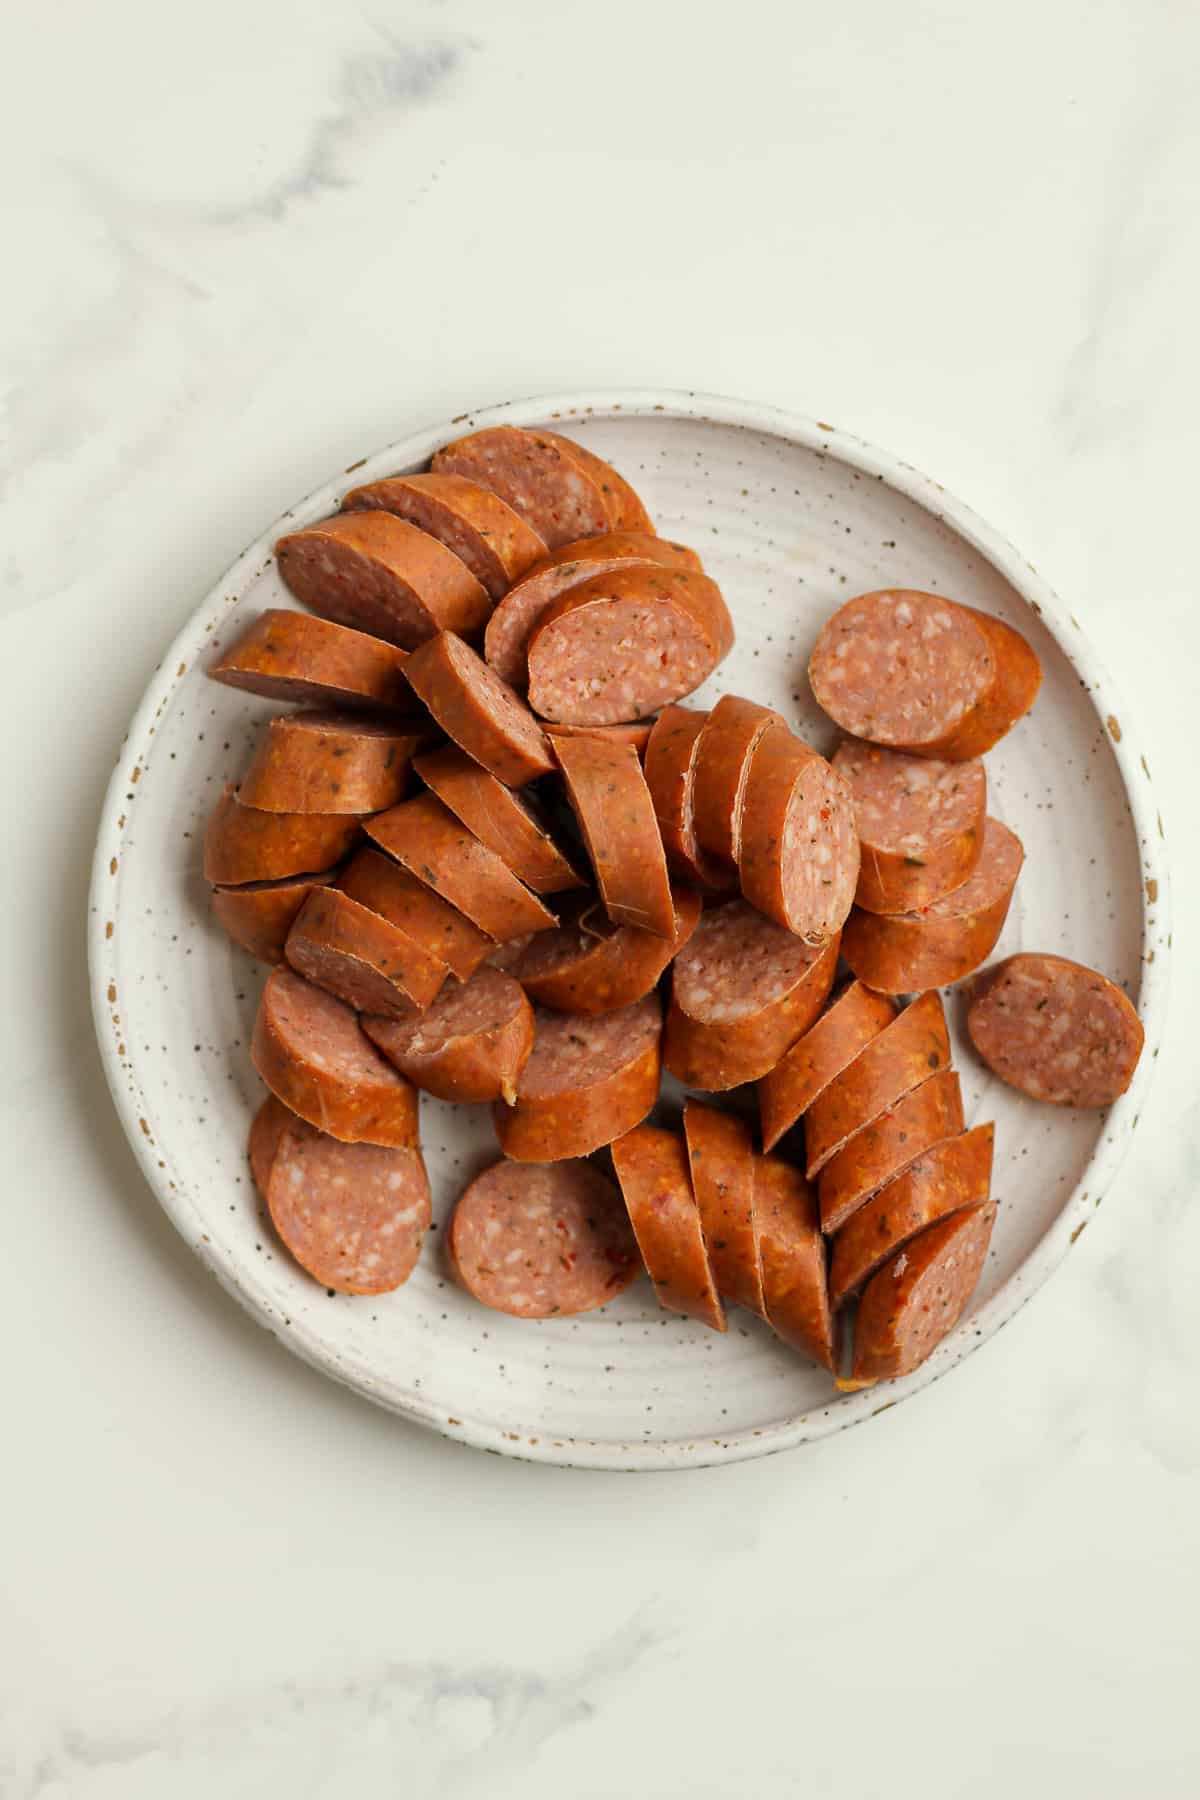 A plate of the sliced sausage.